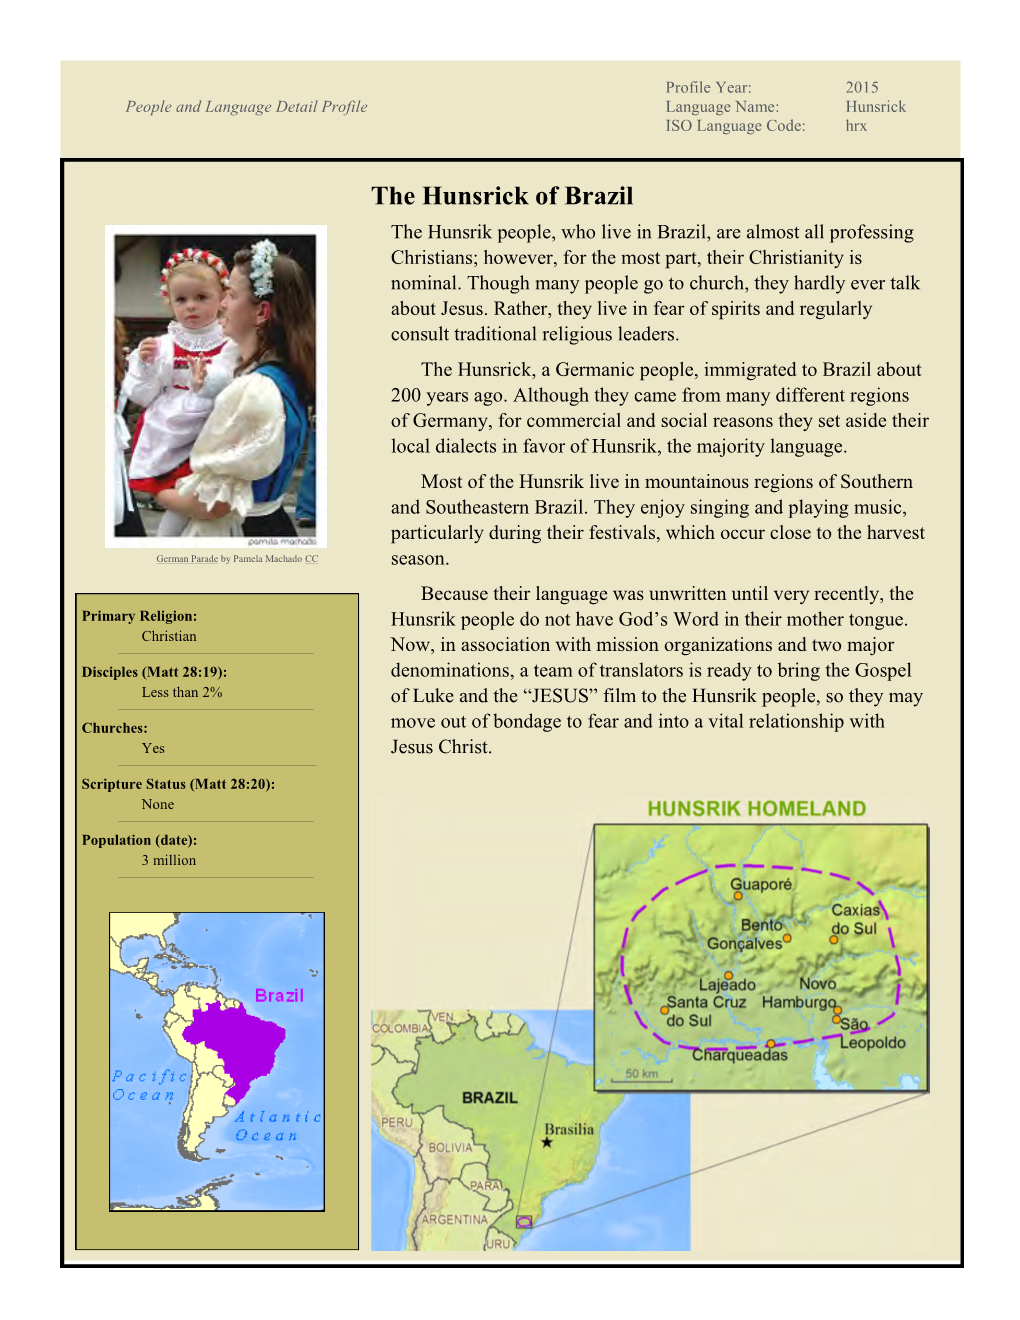 The Hunsrick of Brazil the Hunsrik People, Who Live in Brazil, Are Almost All Professing Christians; However, for the Most Part, Their Christianity Is Nominal